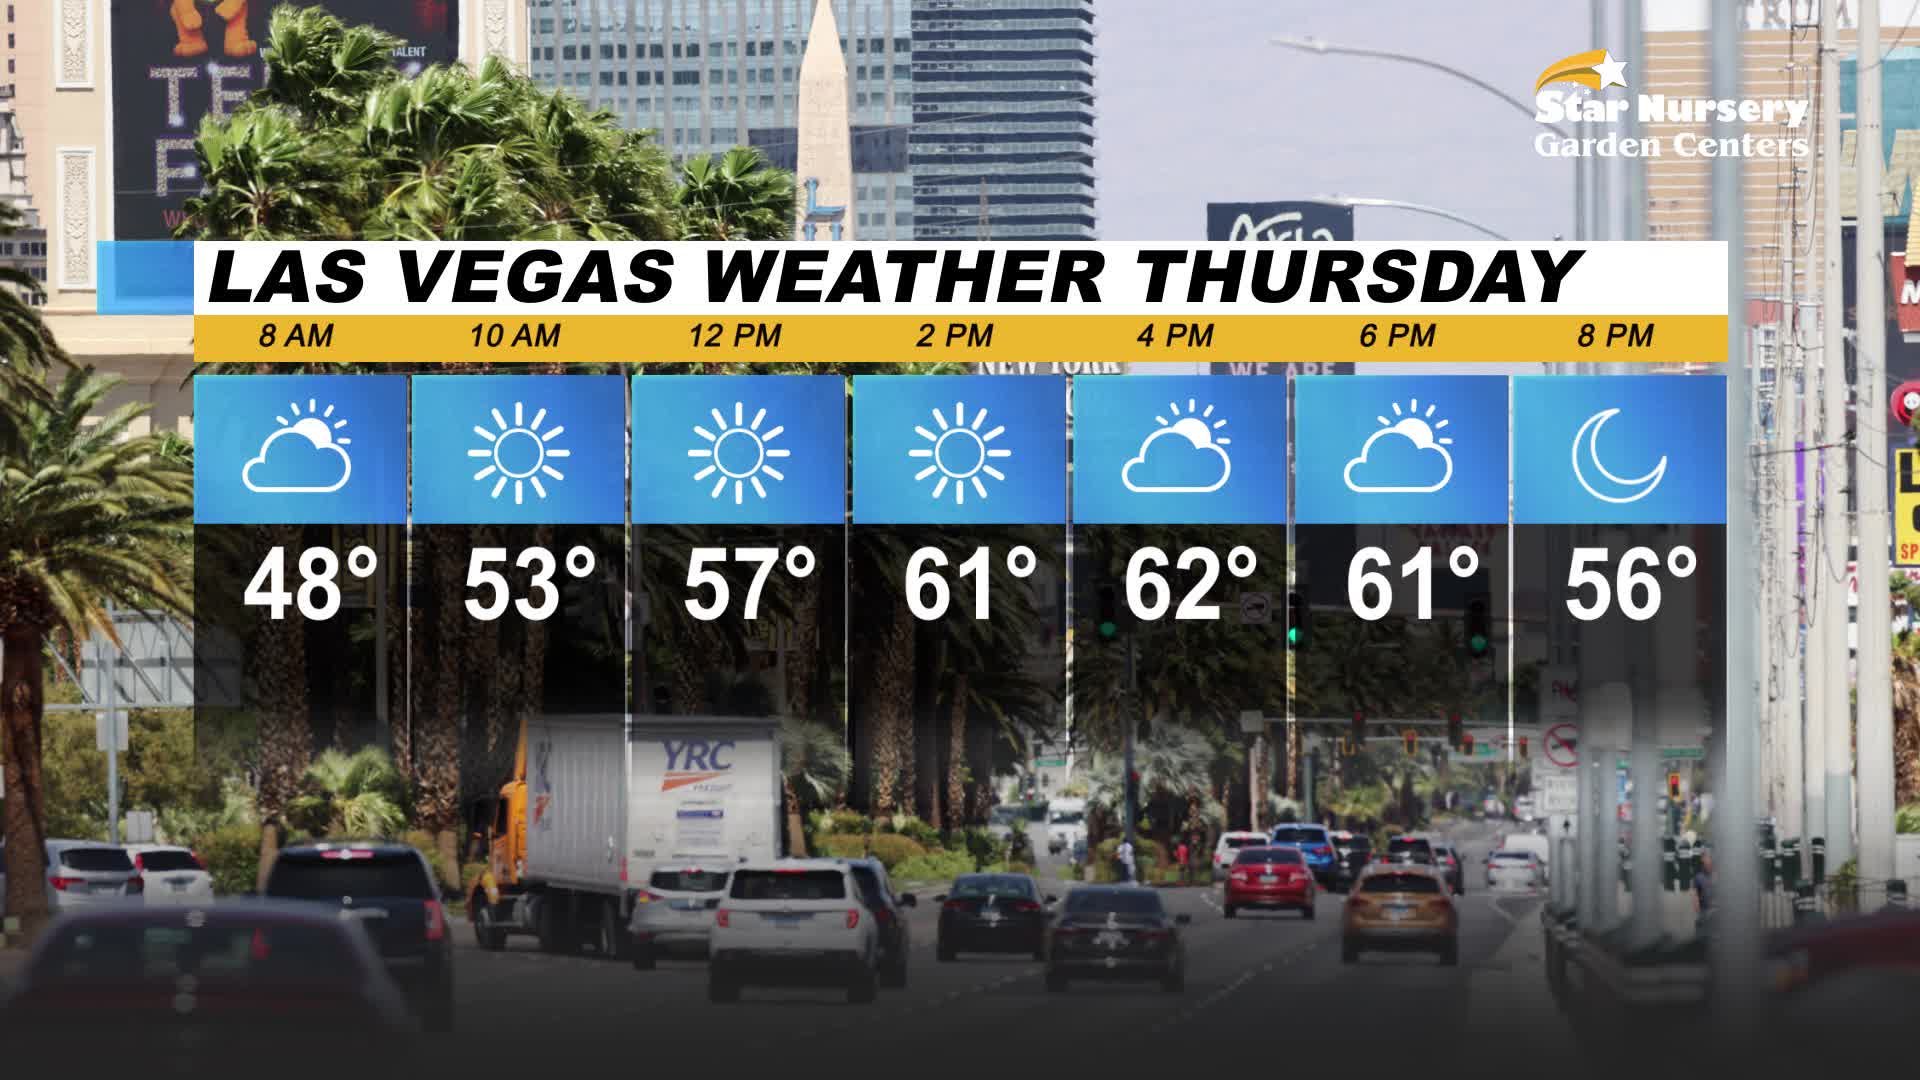 Sunny skies for most of Thursday